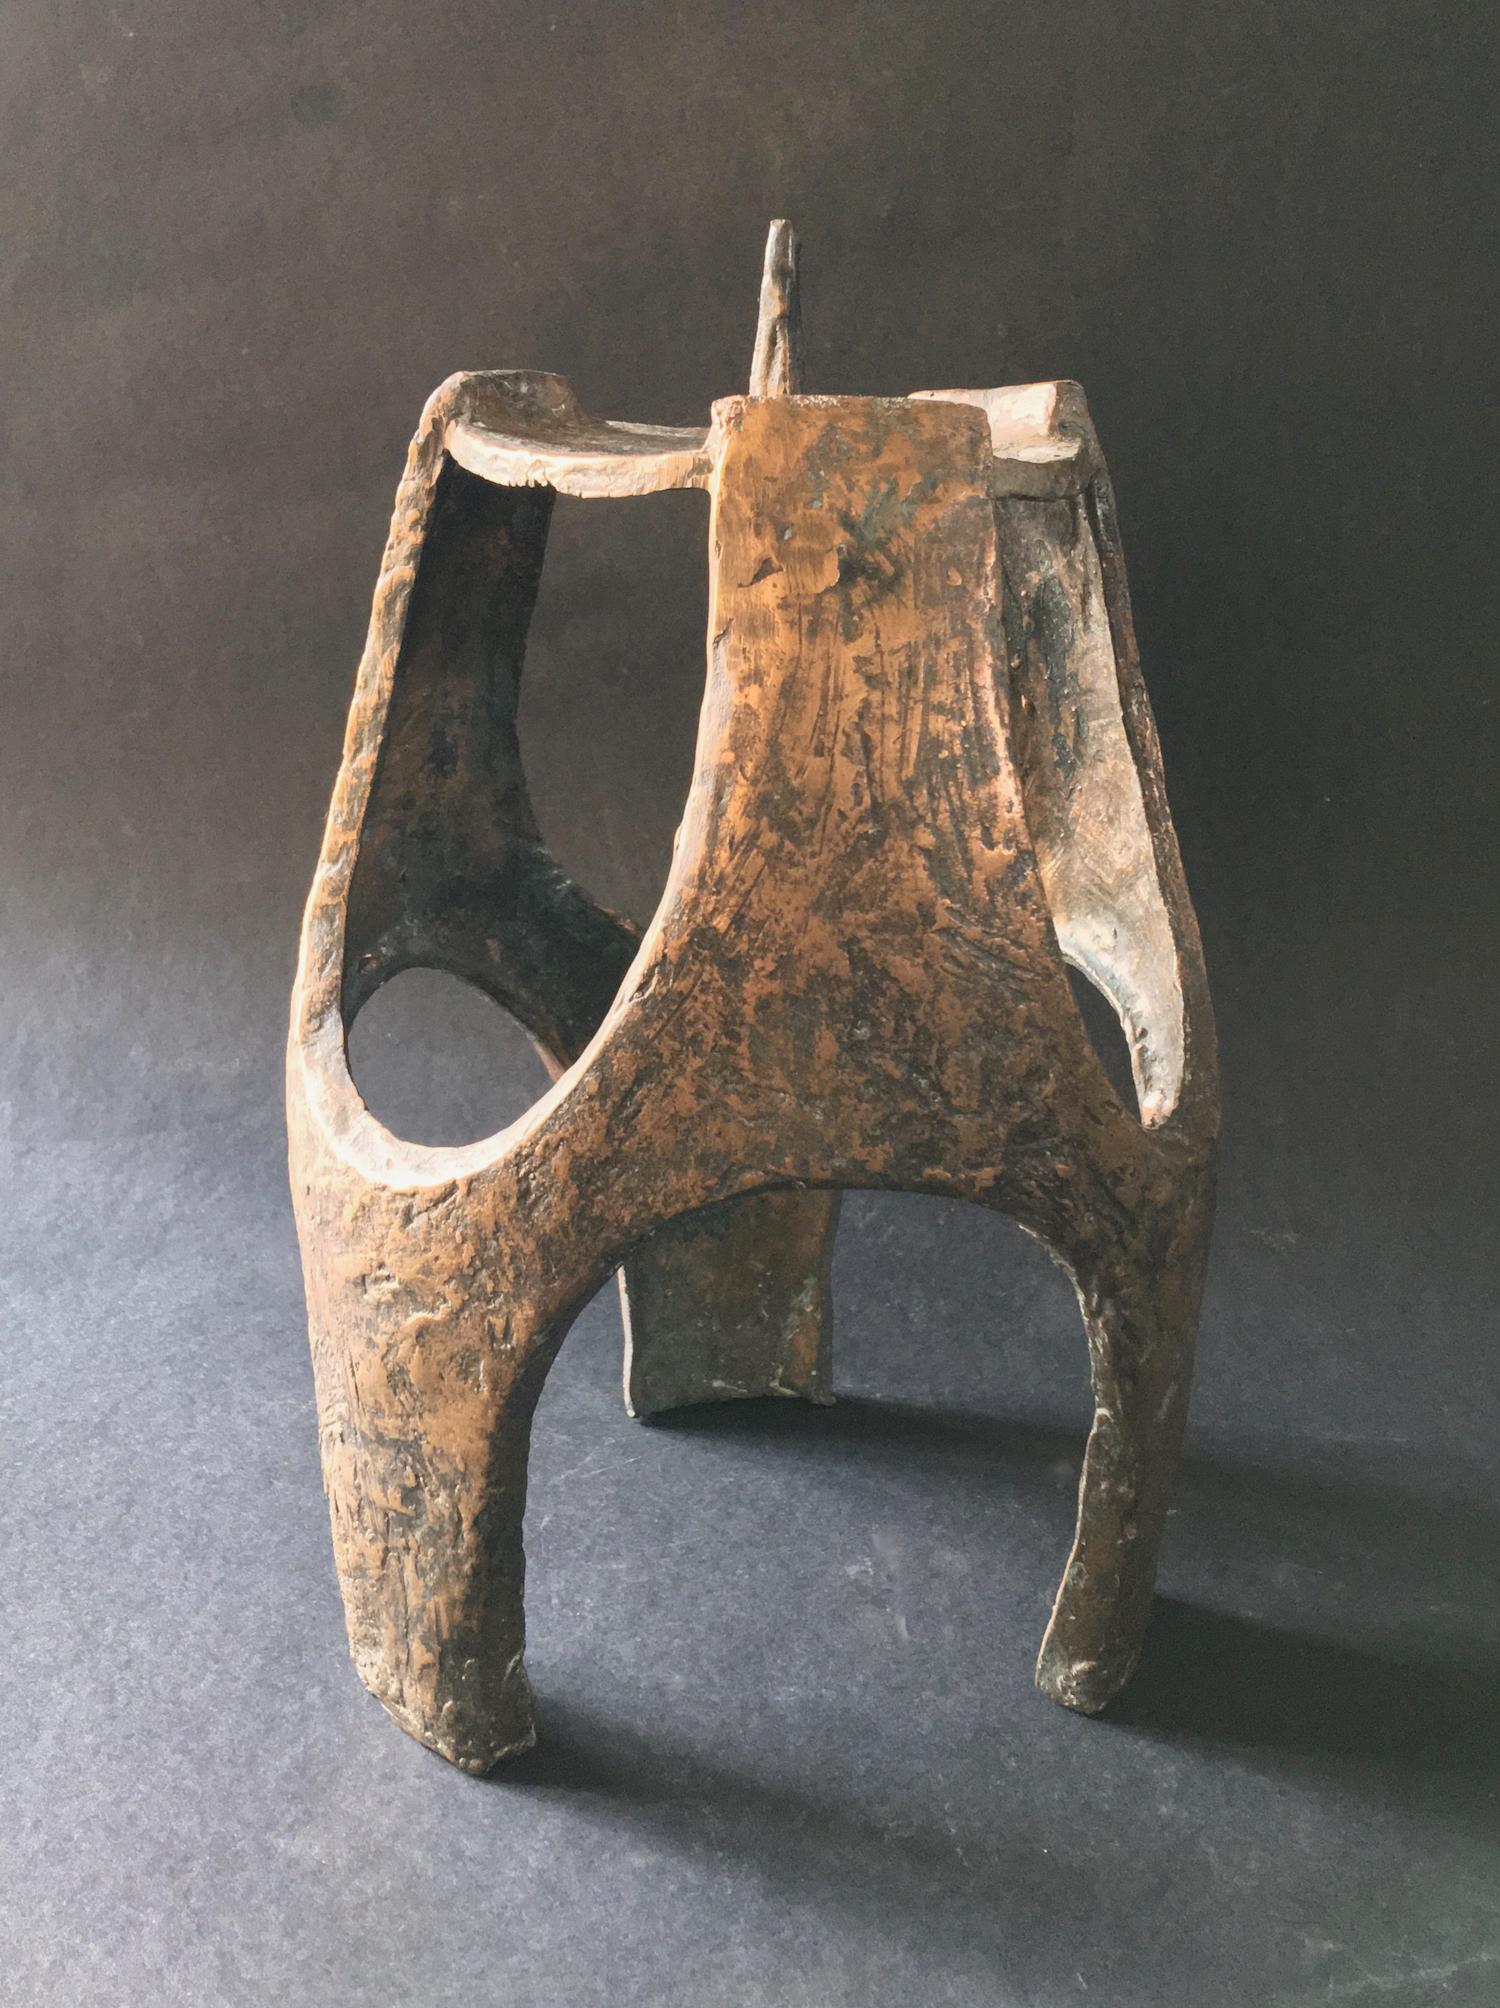 A large single candleholder, in brutalist style, of cast metal, which looks to be bronze. Found in Germany, 20th century. 

The shape has heavy surface texture and minor asymmetries from the original mould, giving it a hand-formed feel. Good